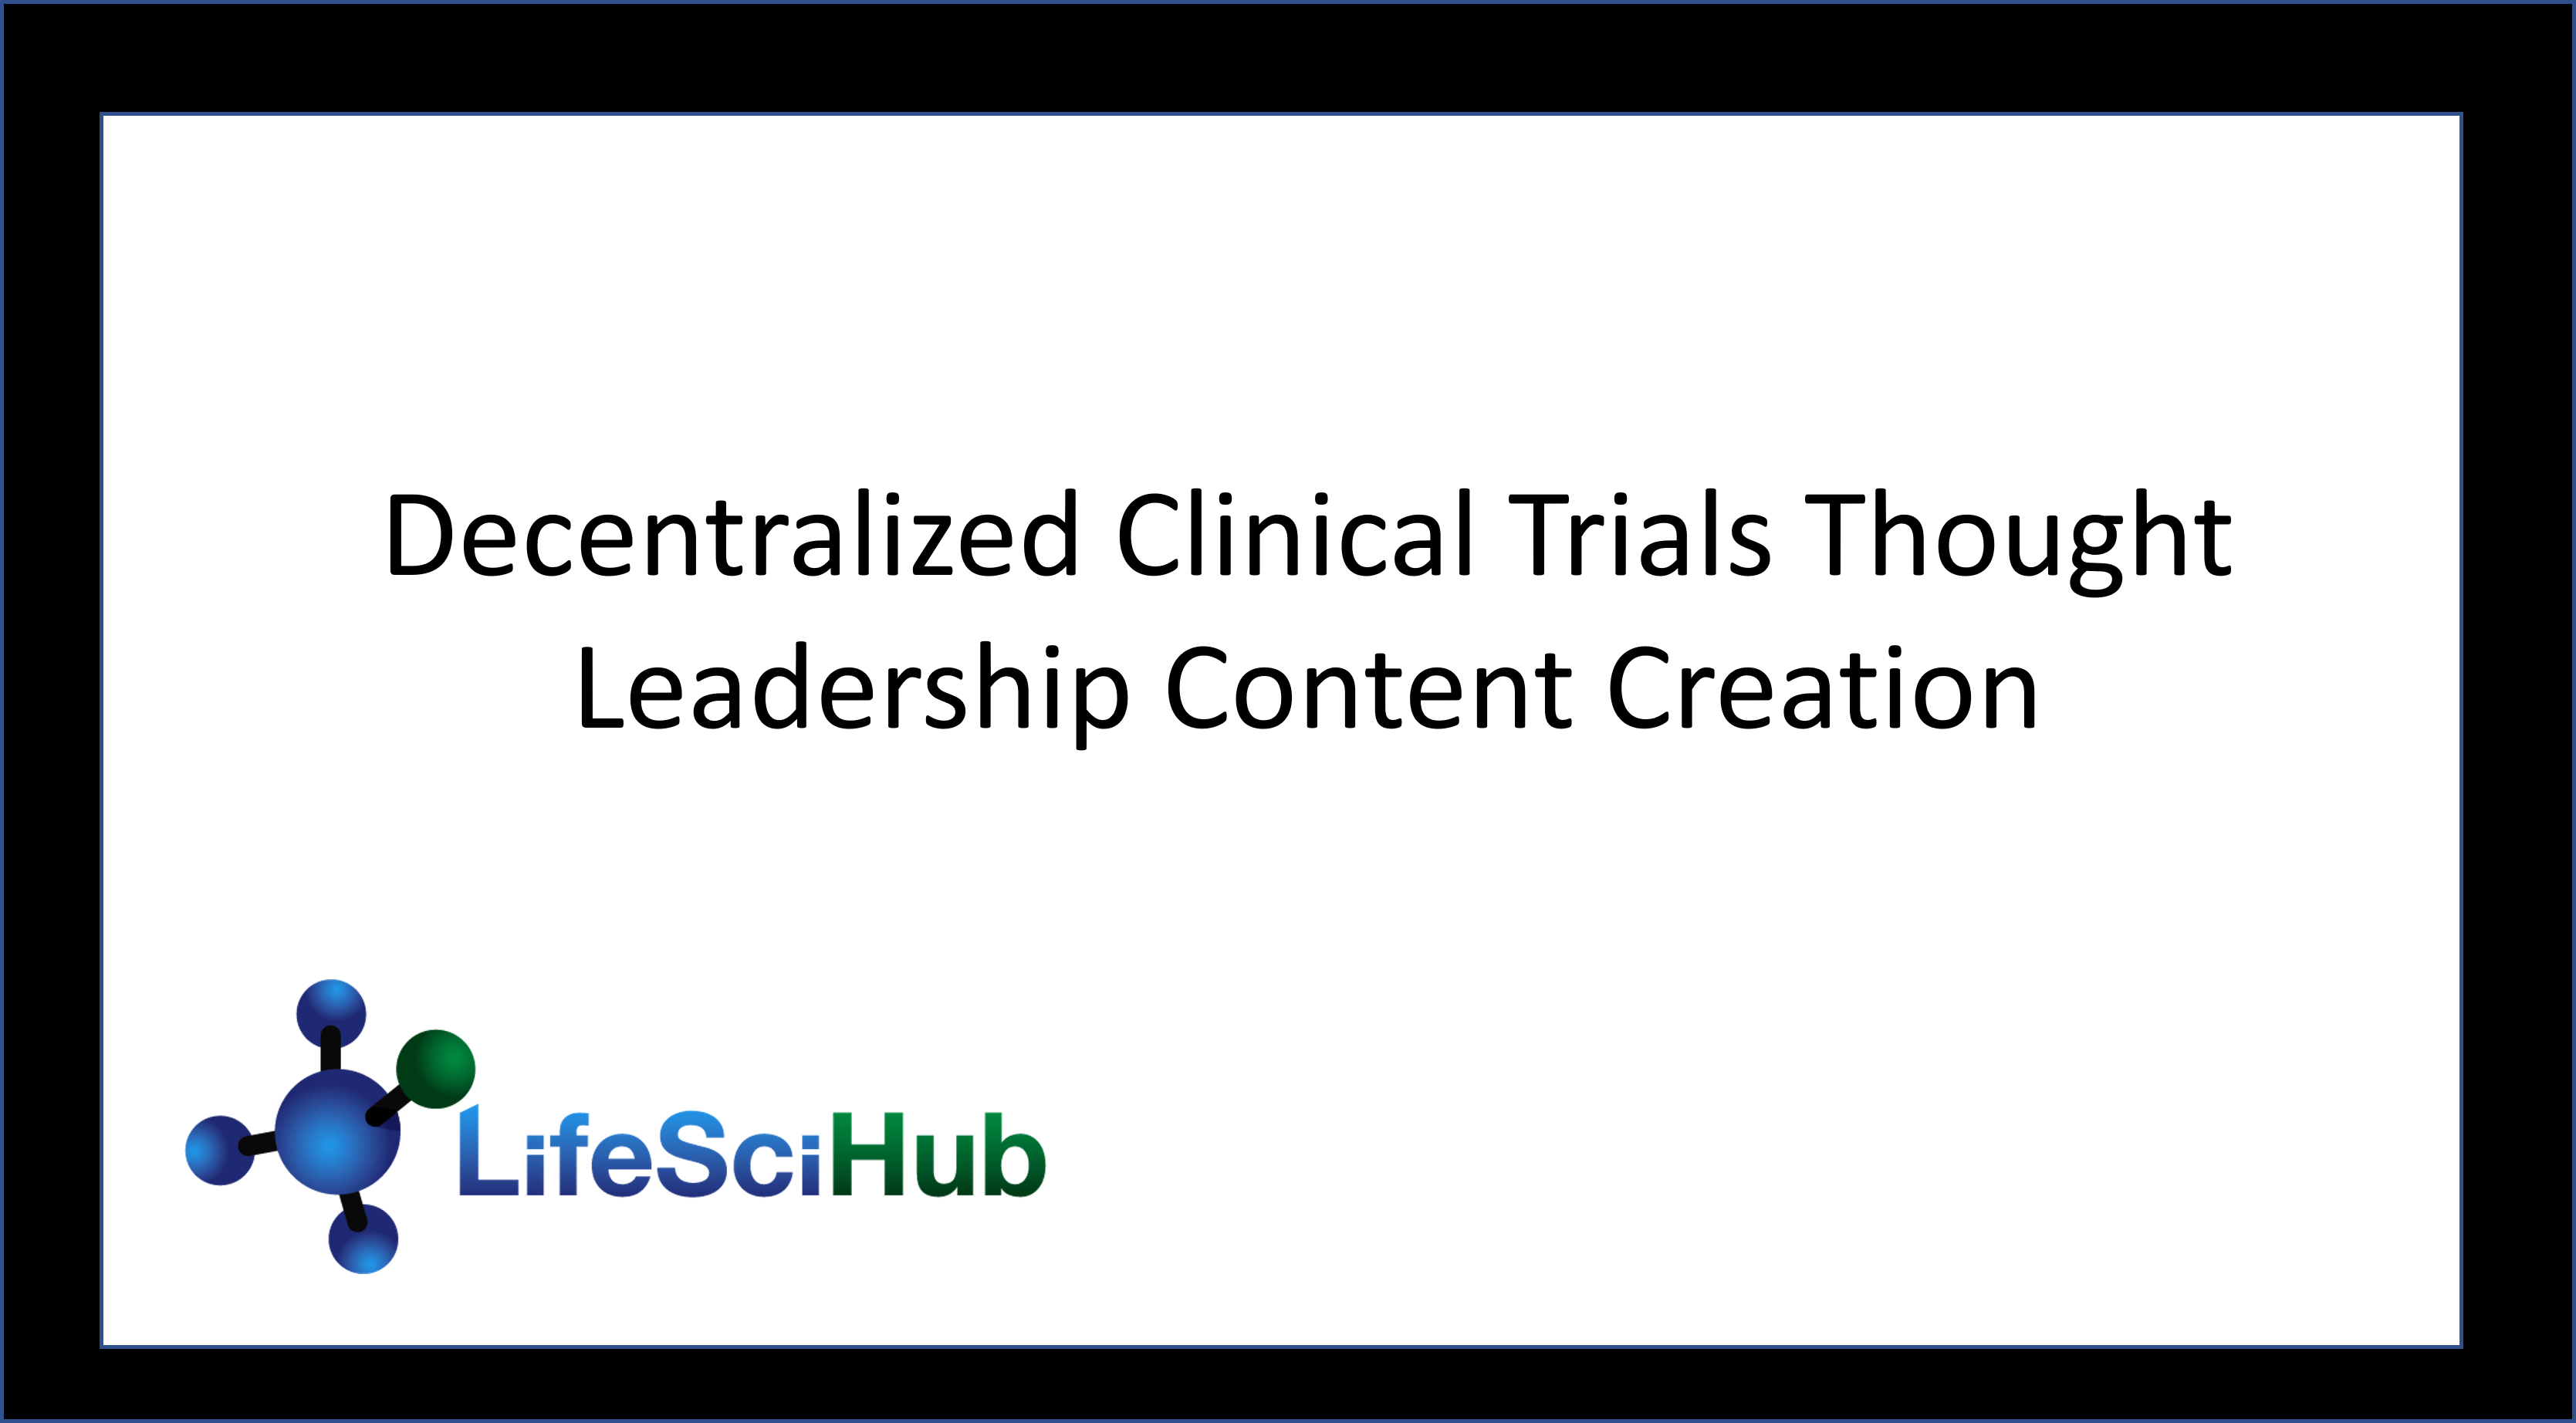 Decentralized Clinical Trials Thought Leadership Content Creation